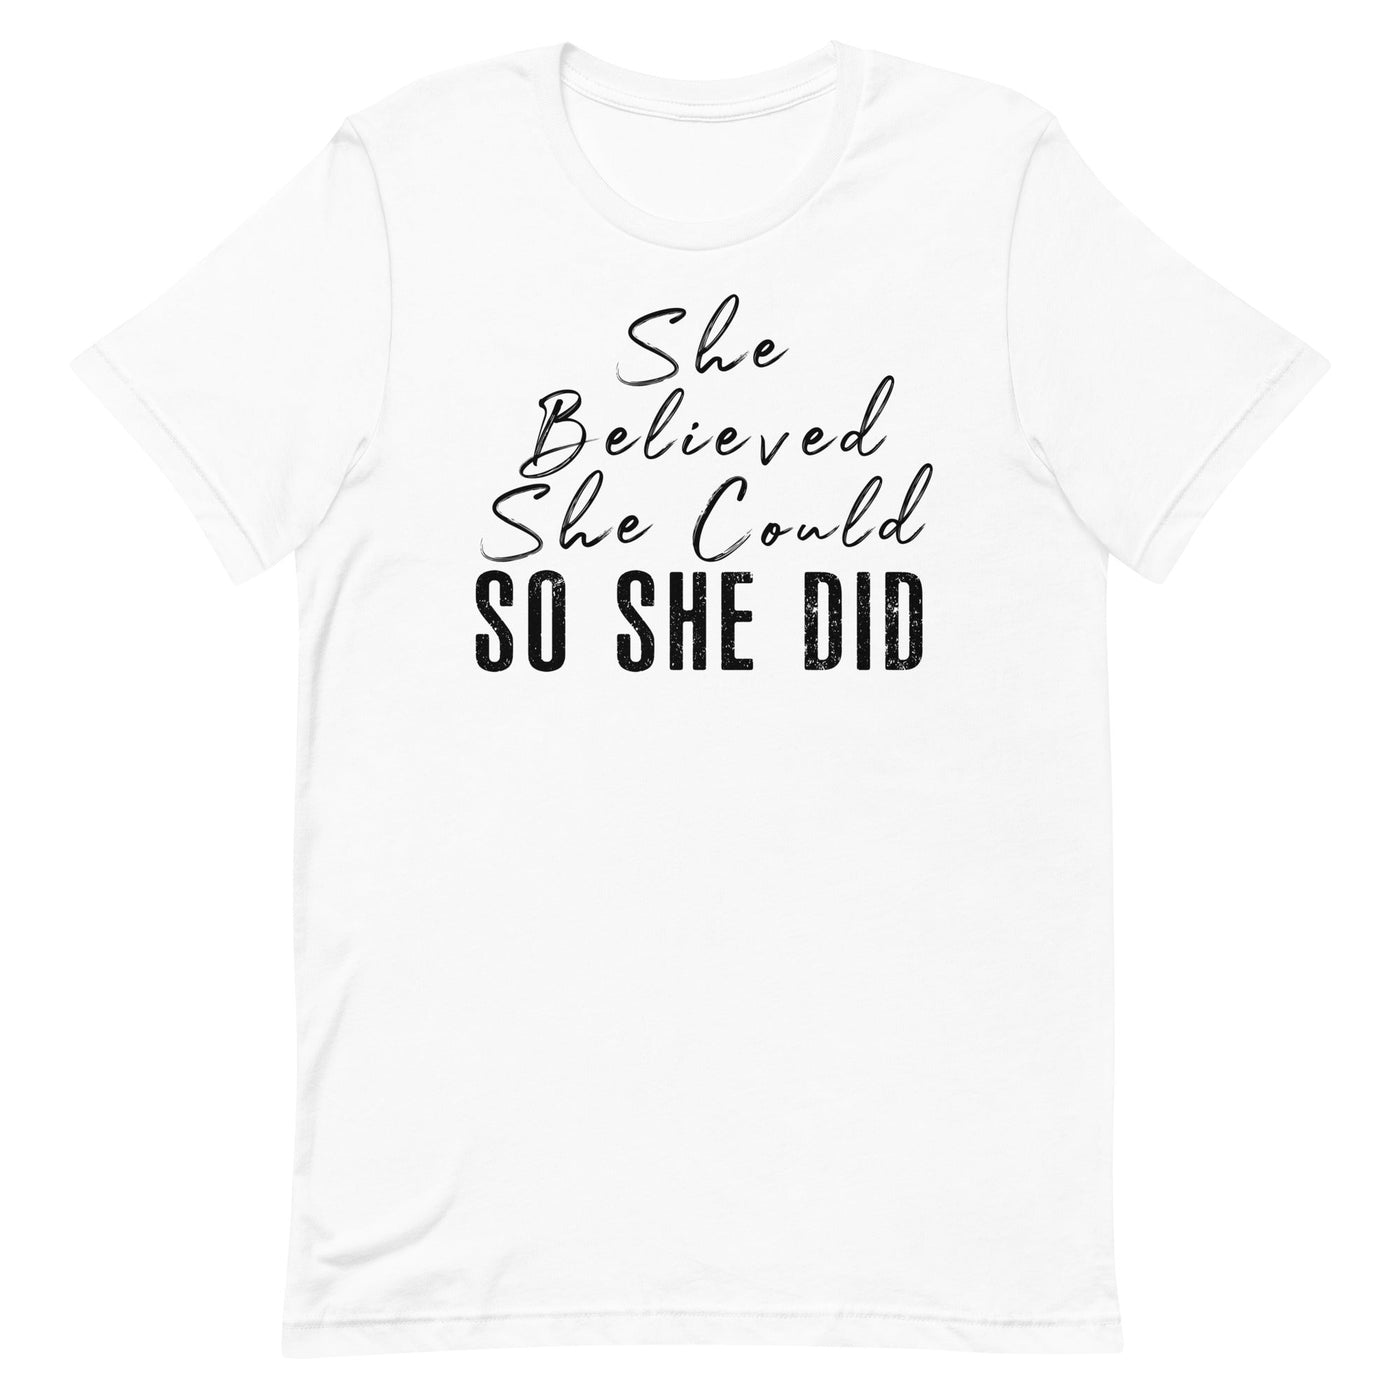 SHE BELIEVED SHE COULD SO SHE DID - BLACK FONT White S 